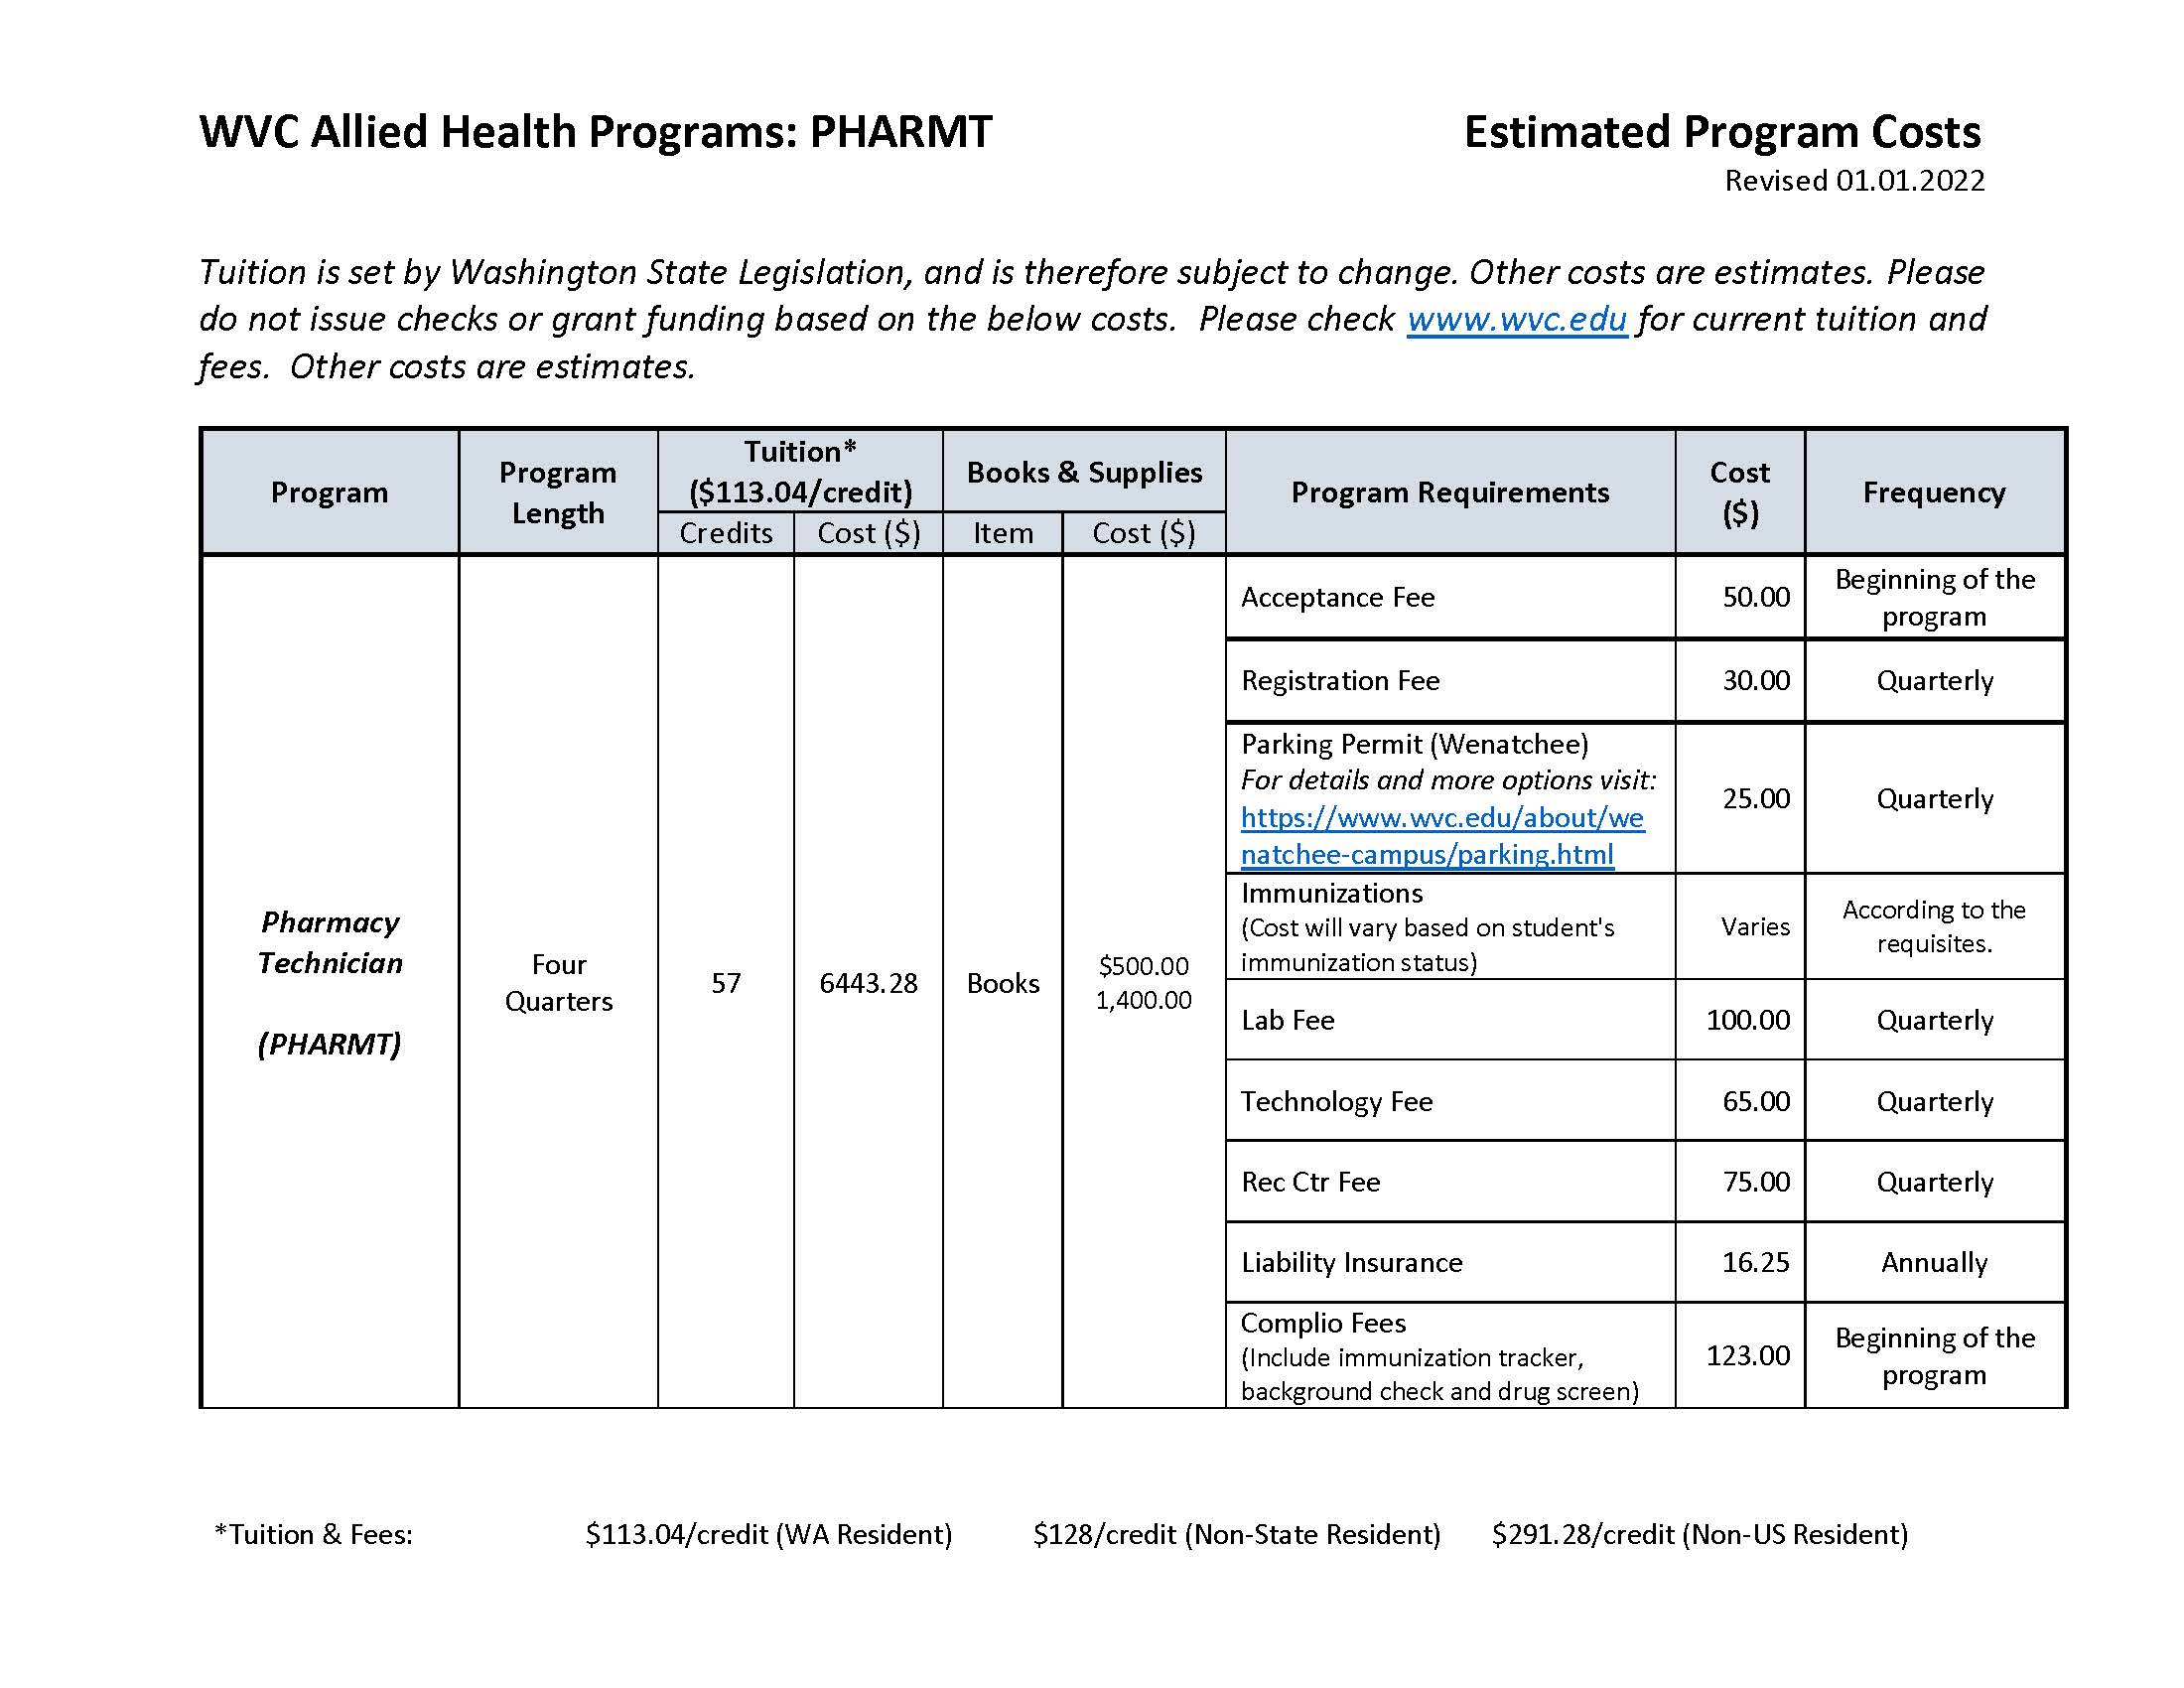 Estimated Cost for the Pharmacy Tech Program